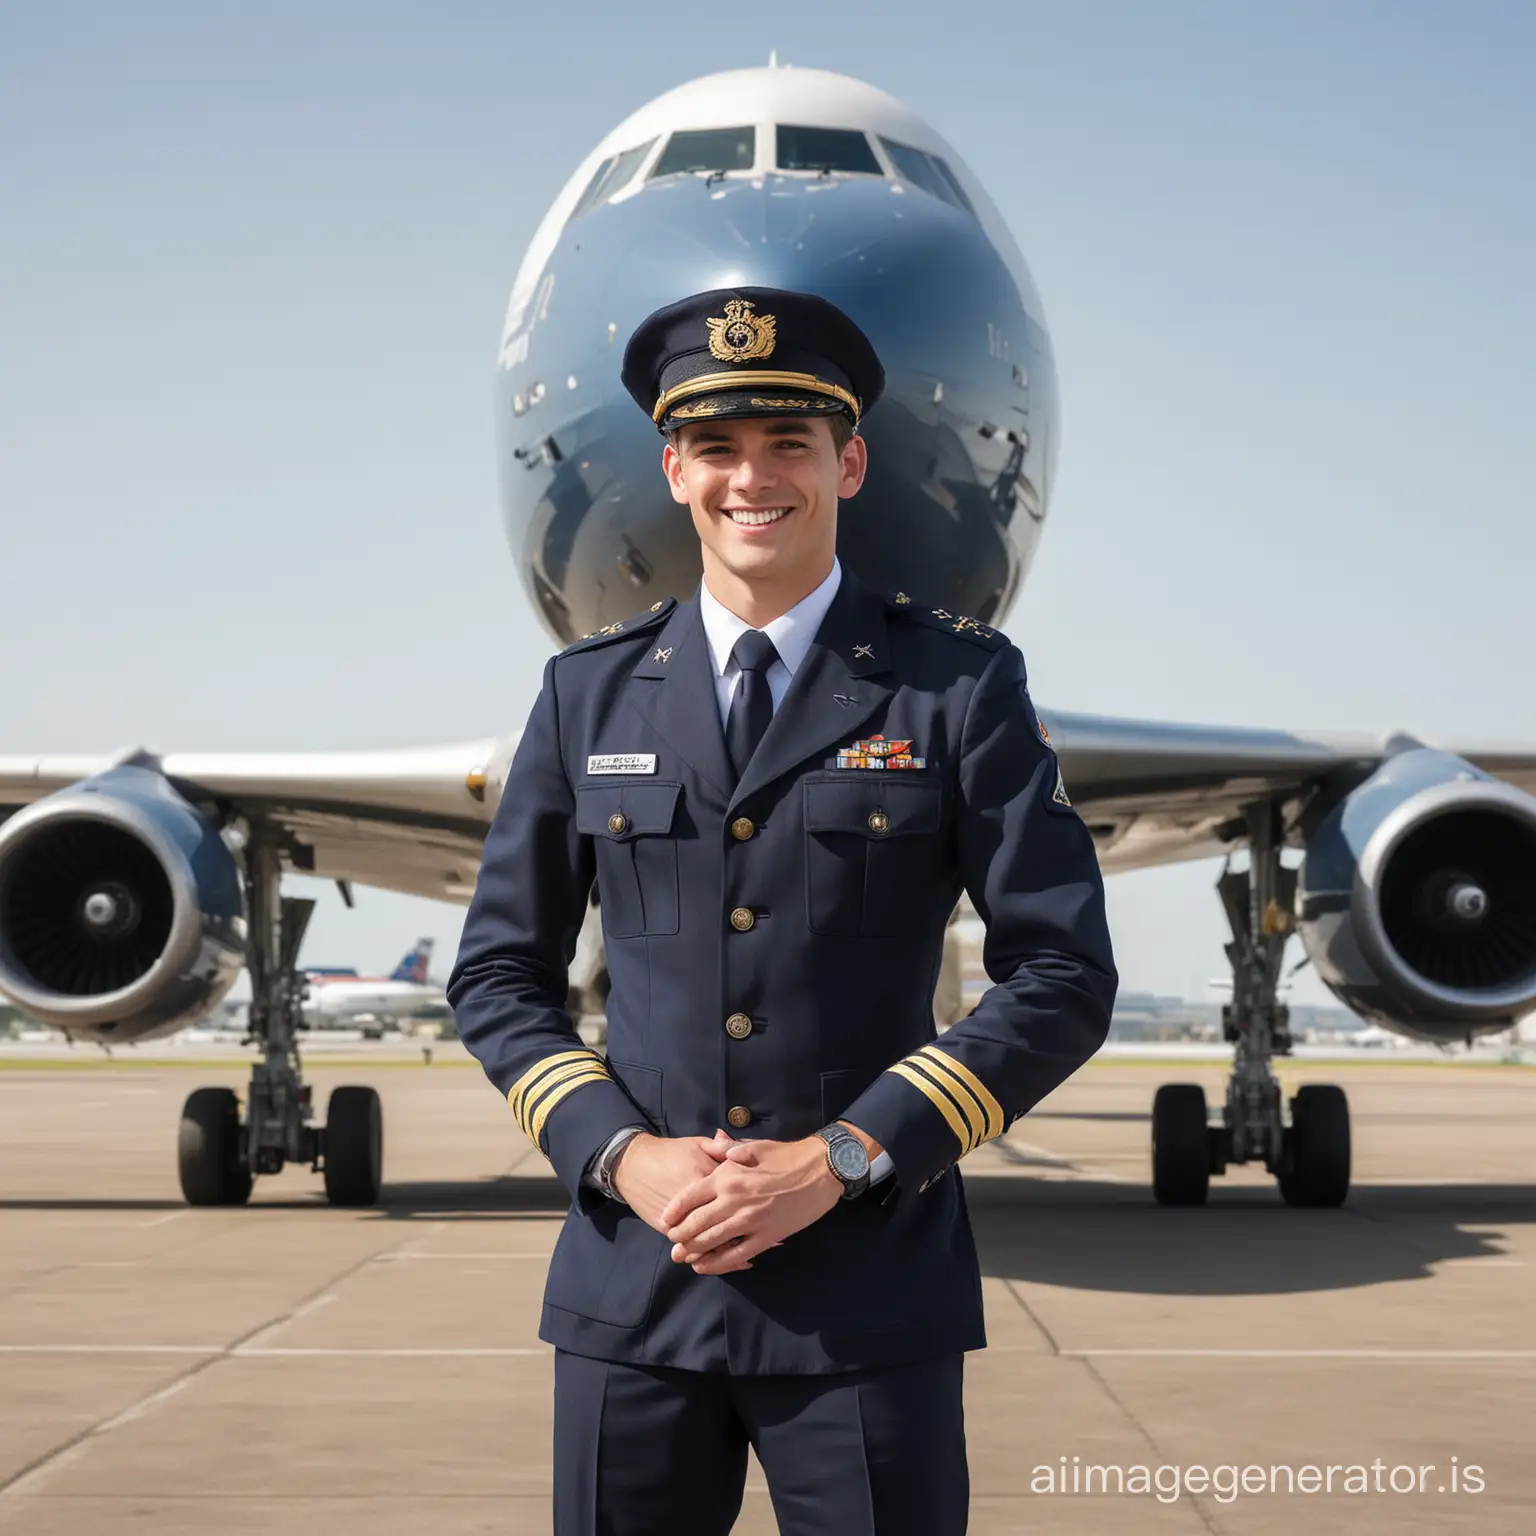 Smiling-Male-Airline-Pilot-in-Navy-Blue-Uniform-by-Jumbo-Jet